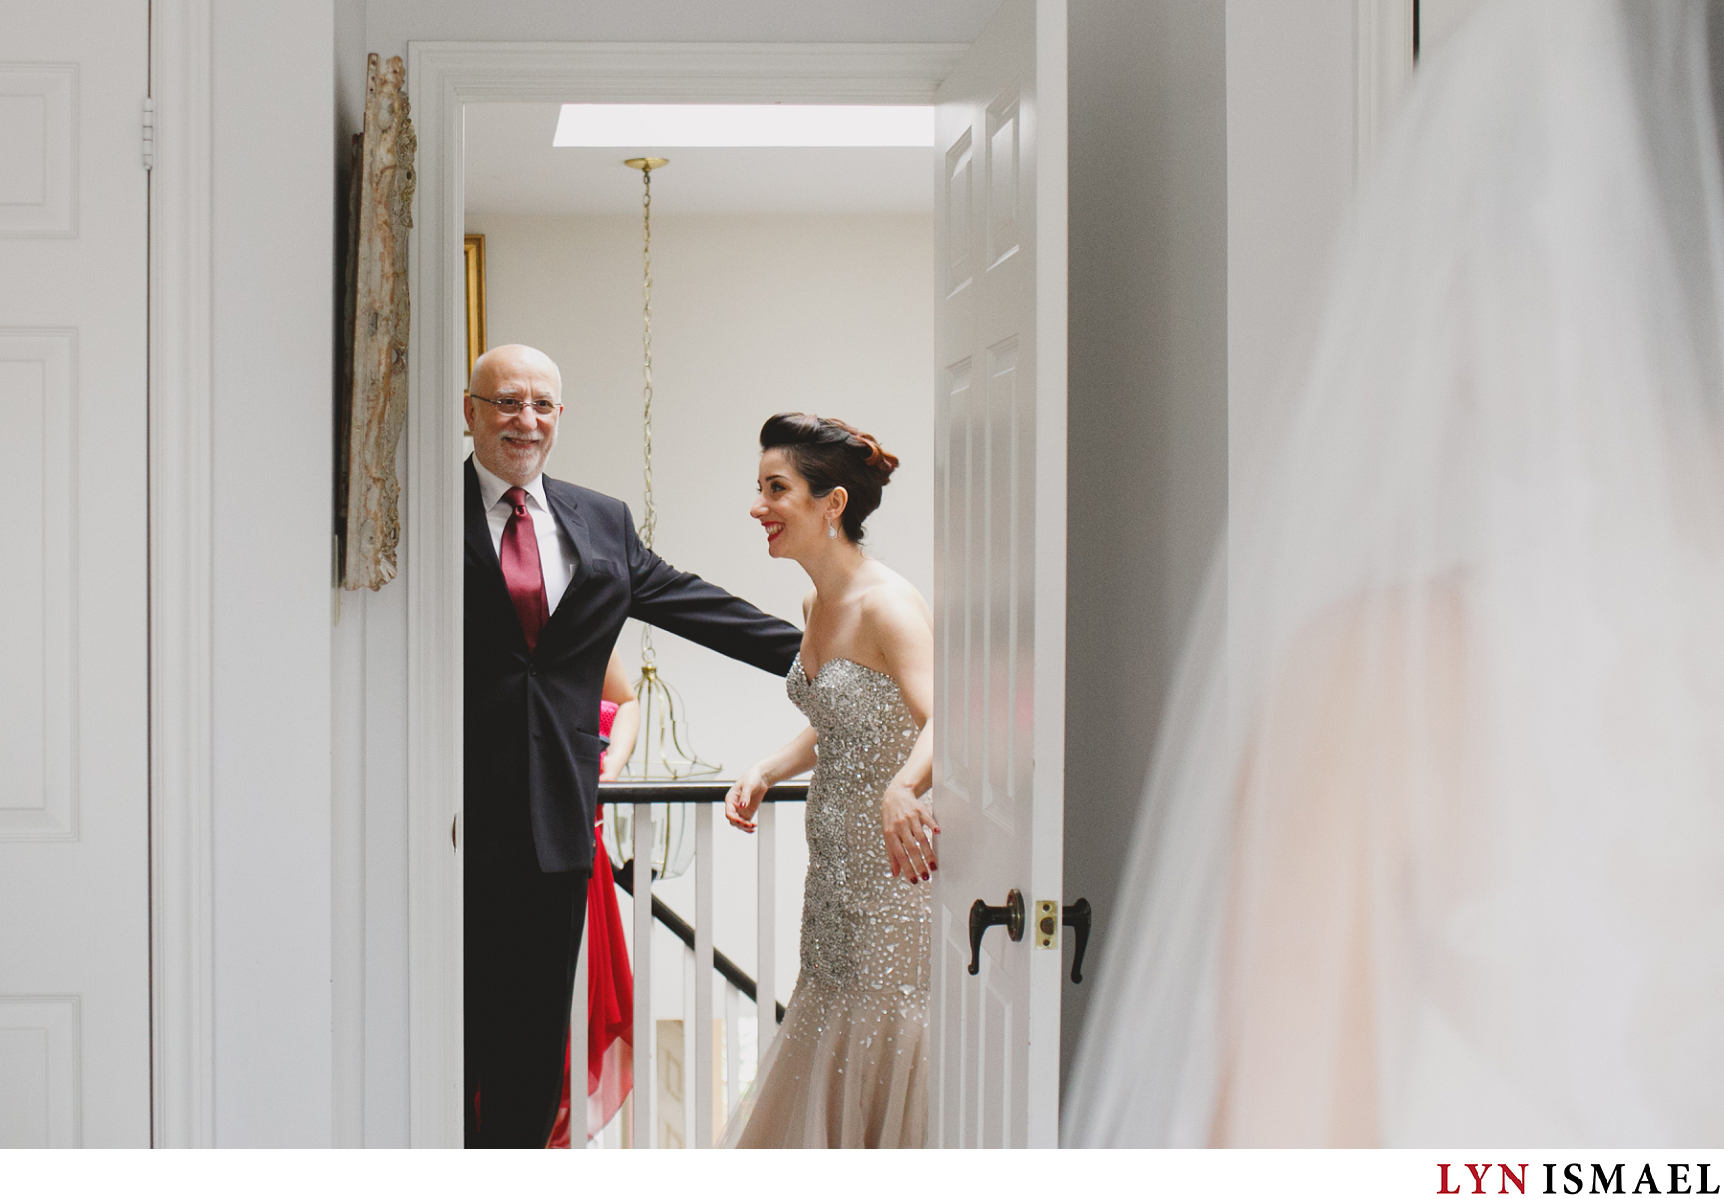 Father of the bride sees his daughter for the first time dressed up like a bride.